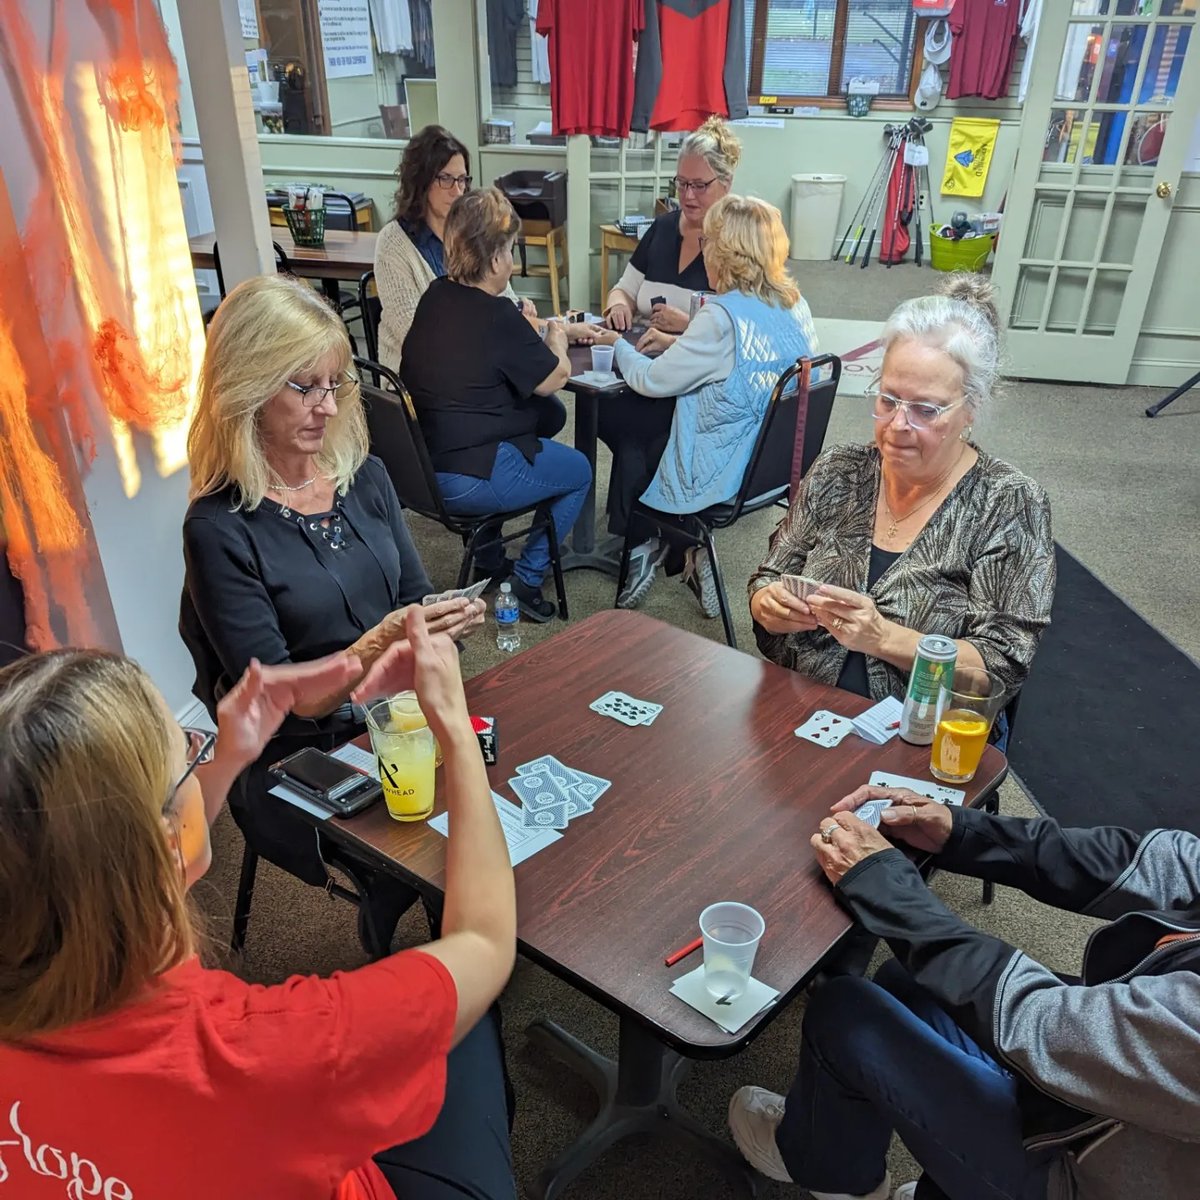 We are excited to bring back Euchre Nights! Every 3rd Tuesday of the Month Starting May 21st. 6-8 PM. All experience levels welcome, we rotate partners so come by yourself or bring some friends!